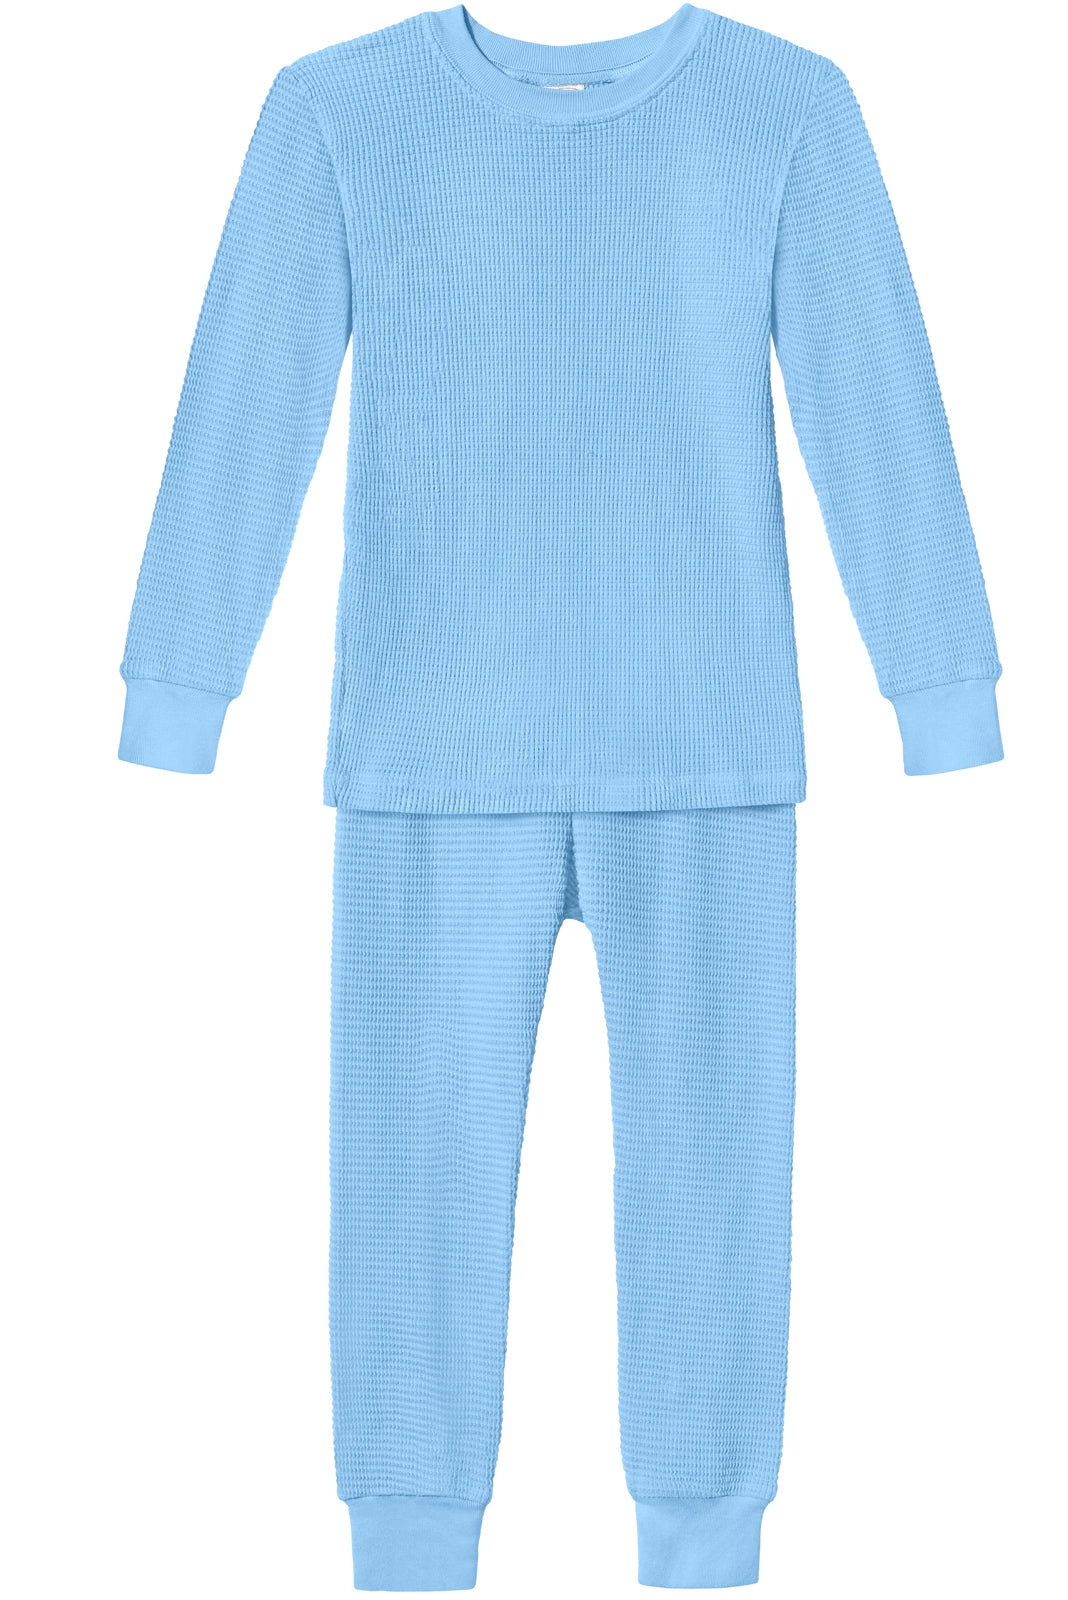 Buy Long-Sleeved Thermal Underwear Set by Thermo from Ourkids